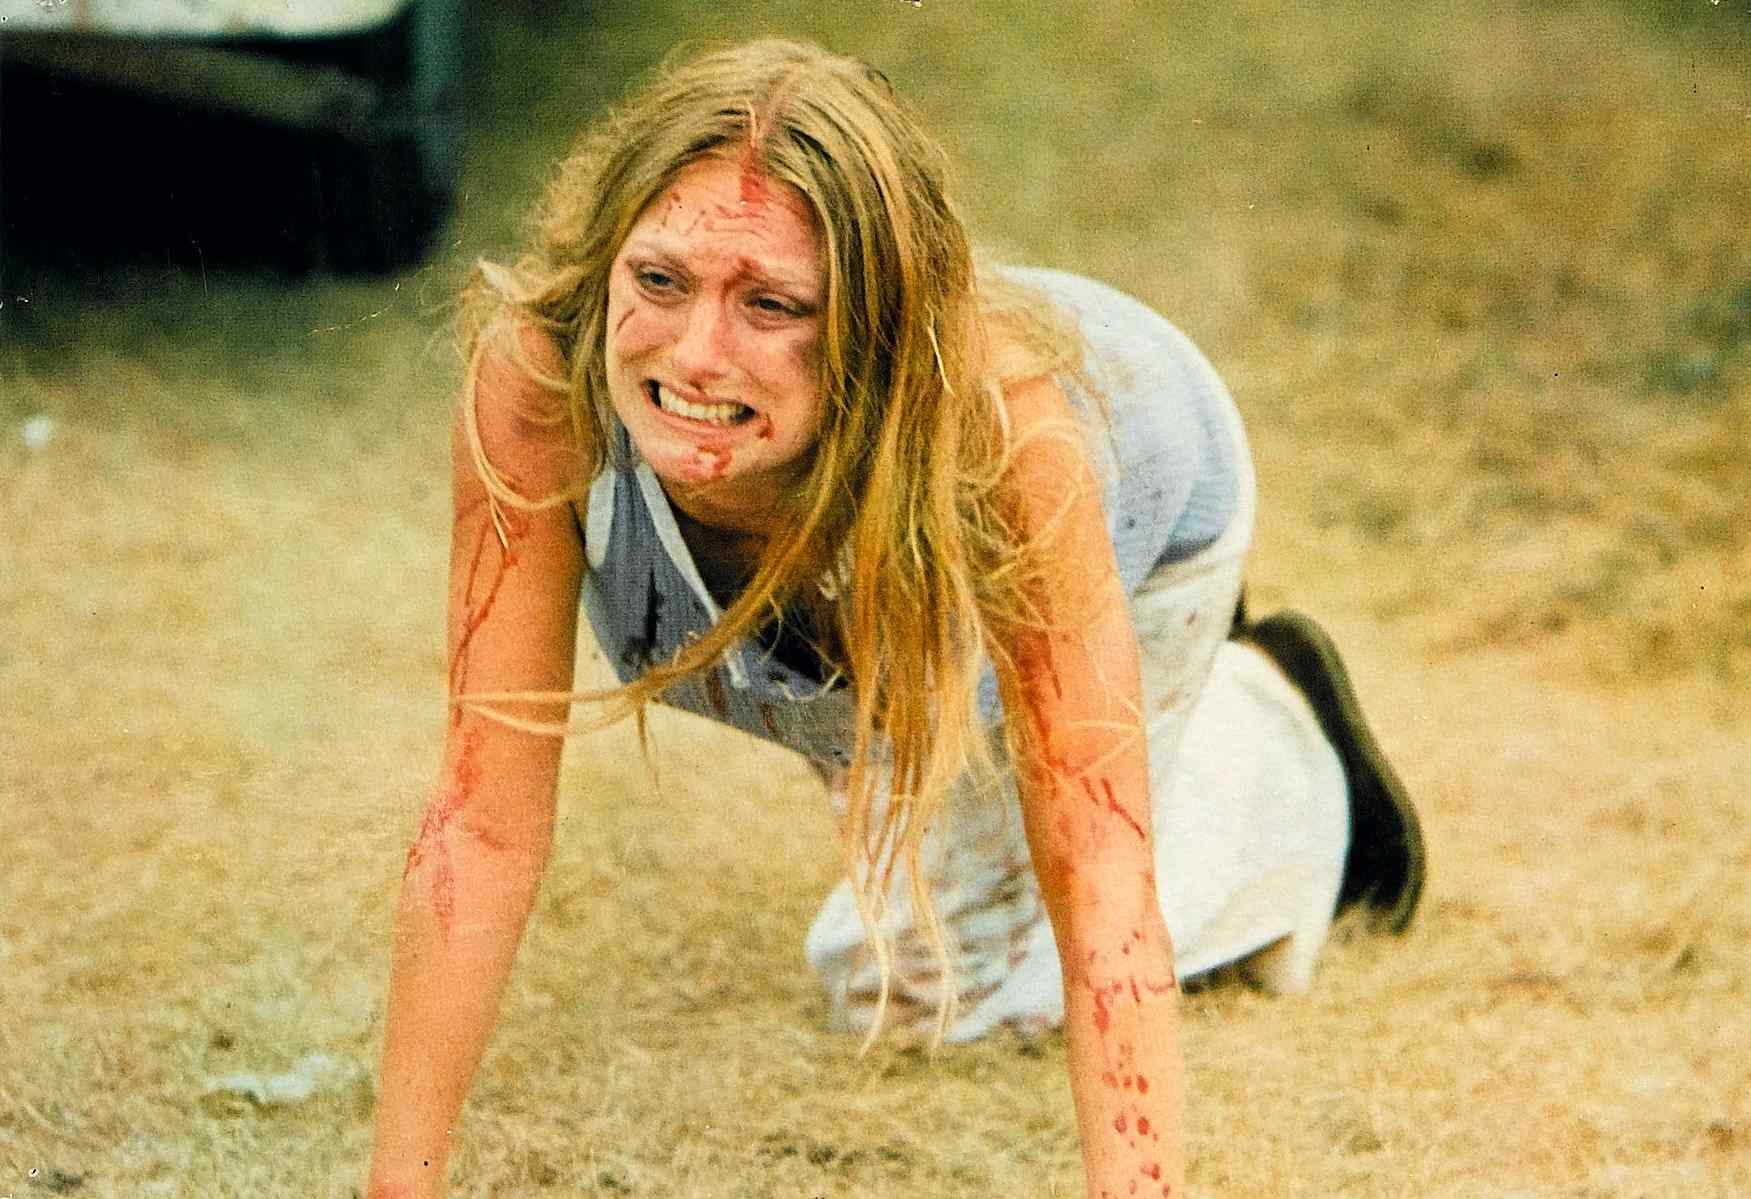 Sally (Marilyn Burns) in Tobe Hooper's 1974 grindhouse masterpiece The Texas Chainsaw Massacre.